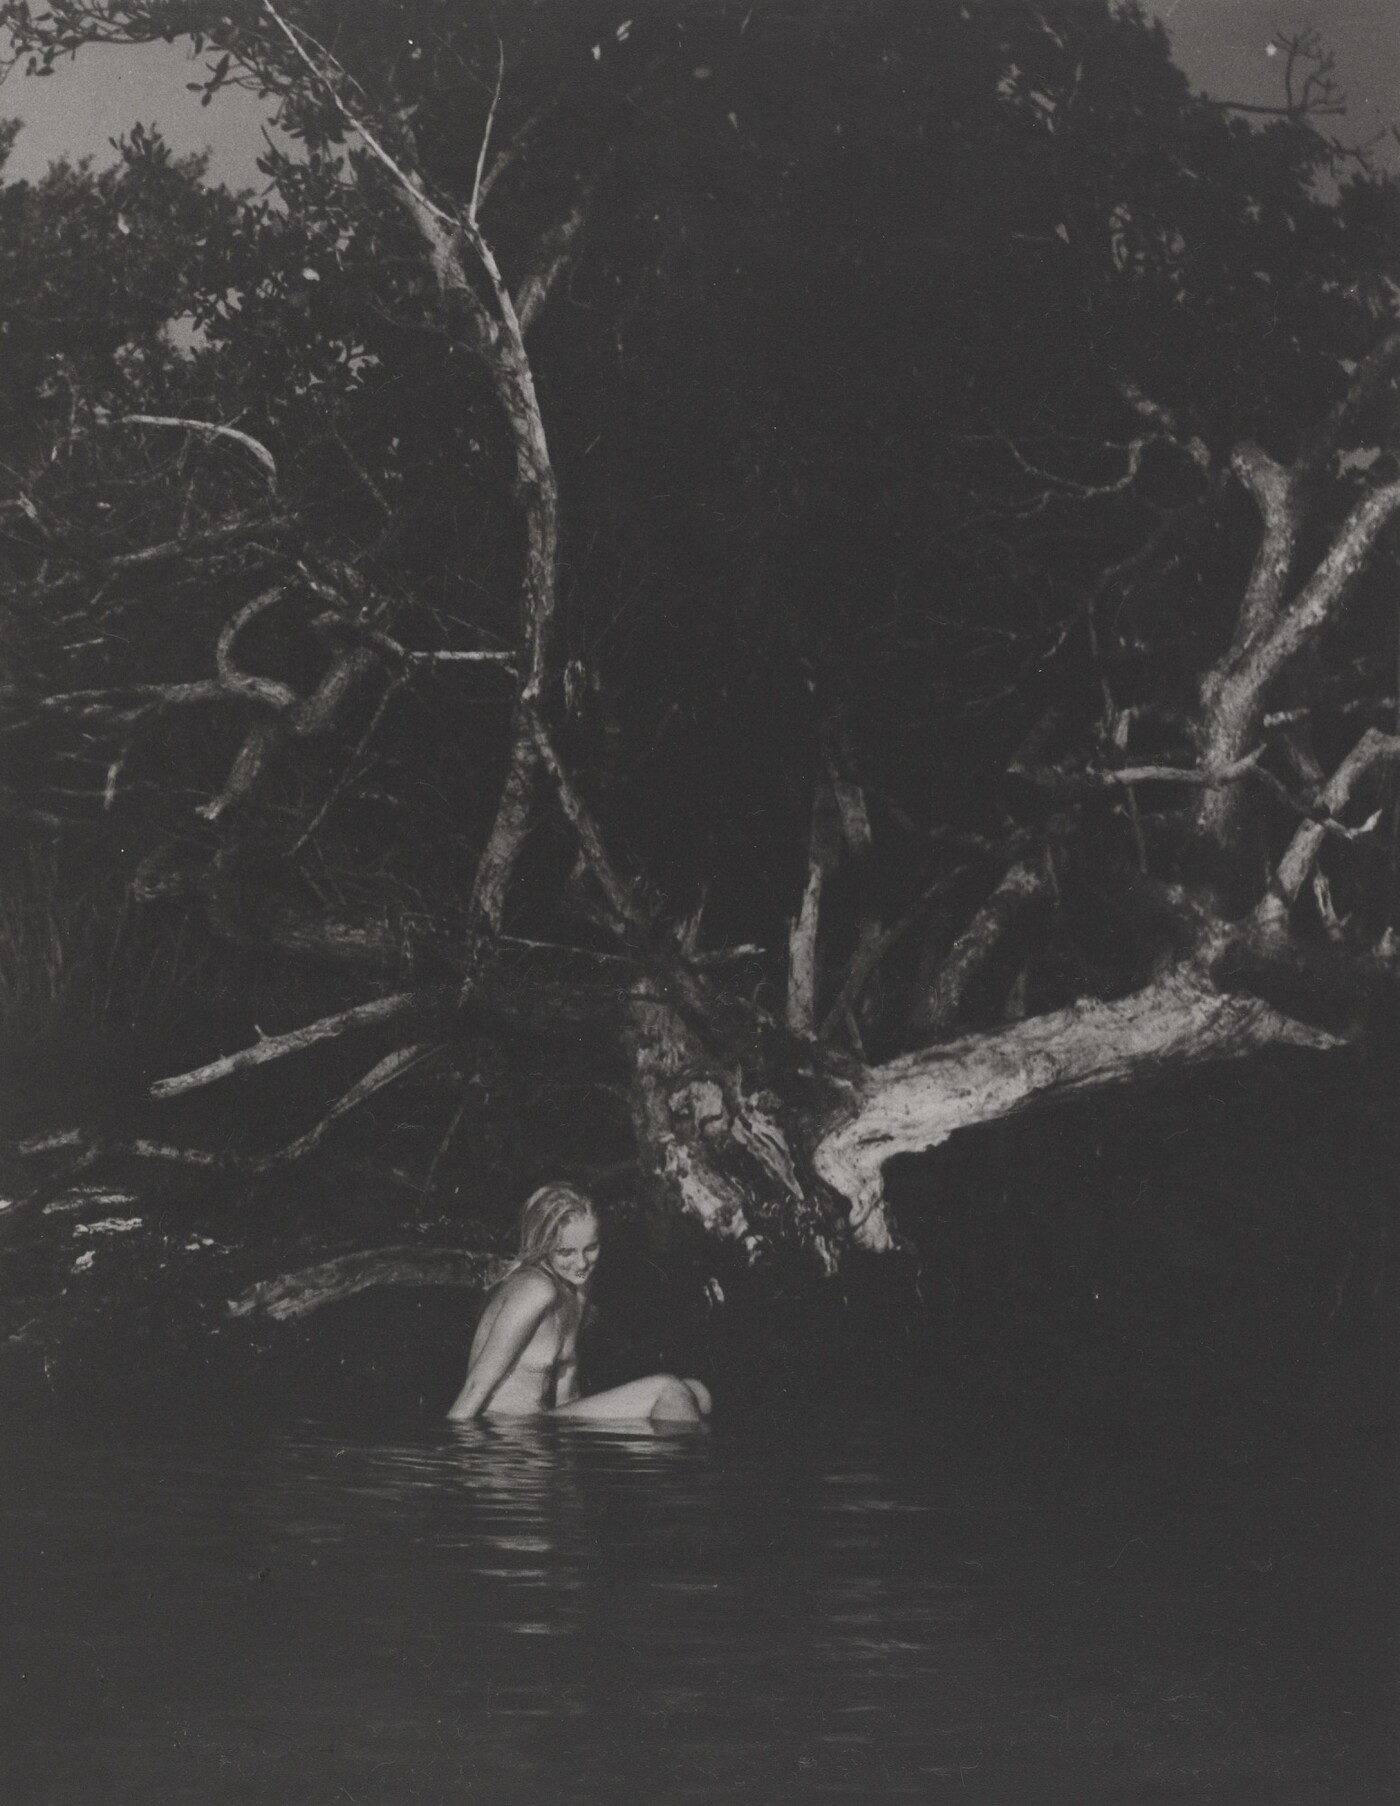 Nell Dorr :: The Secret Pool, 1928. # 18 also # 58, From In a Blue Moon, published 1939. Amon Carter Museum